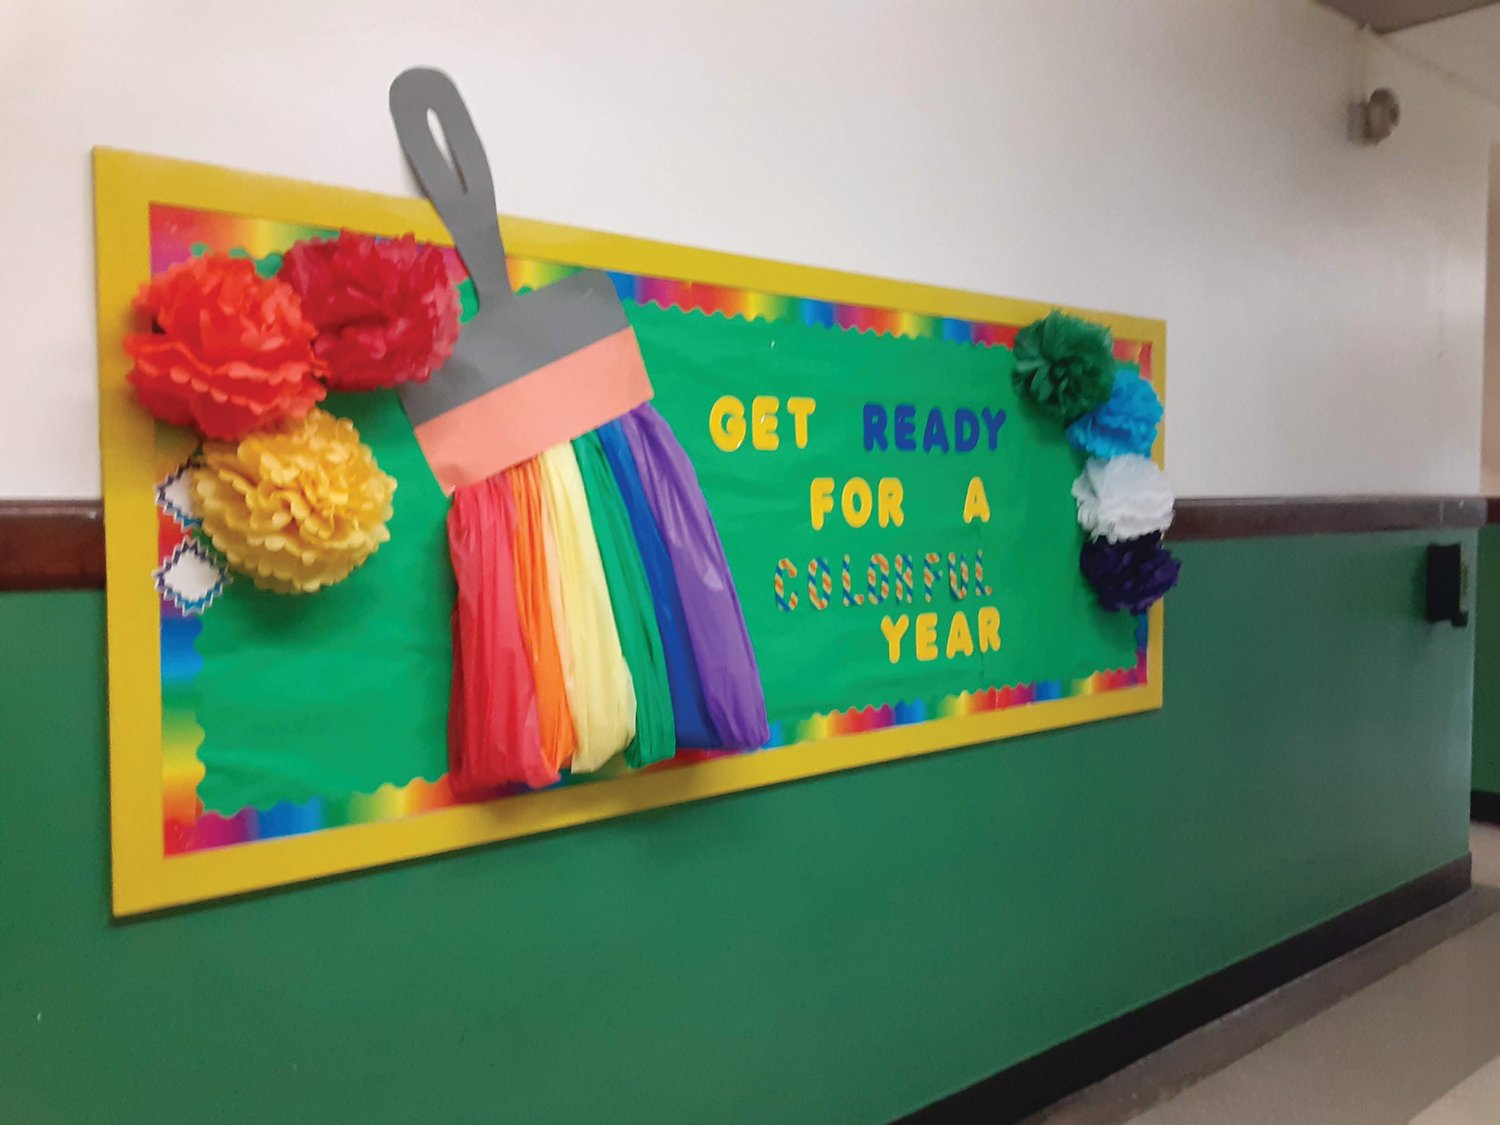 WELCOMING AND BRIGHT:  The hallways of the schools showed signs of a new year, with bulletin boards such as this one spotted in the halls of Garden City at Barrows.